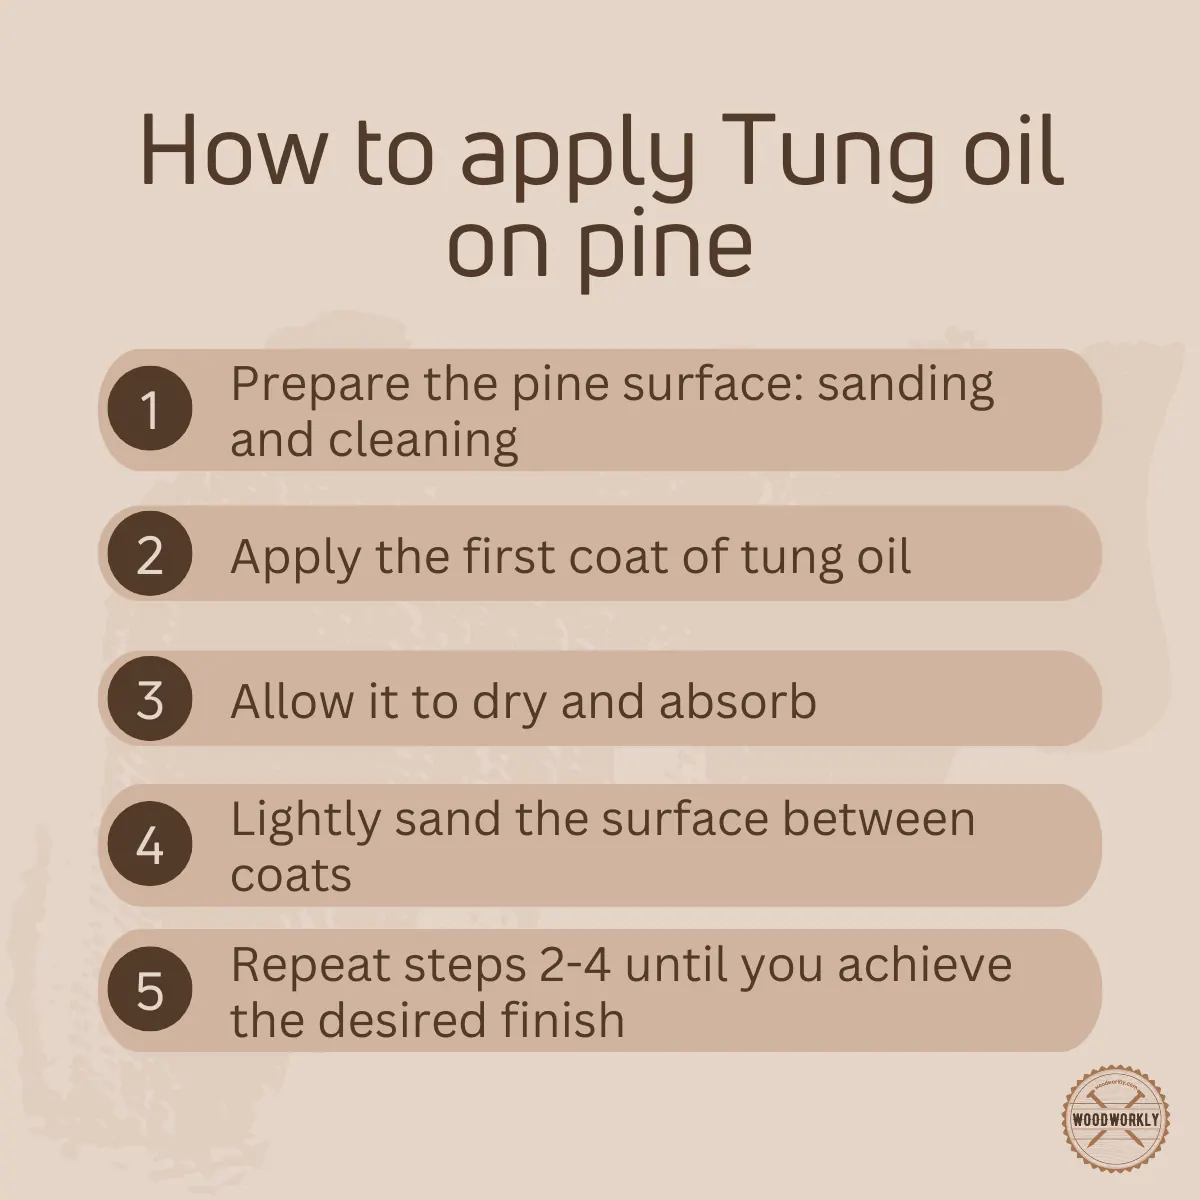 How to apply Tung oil on pine